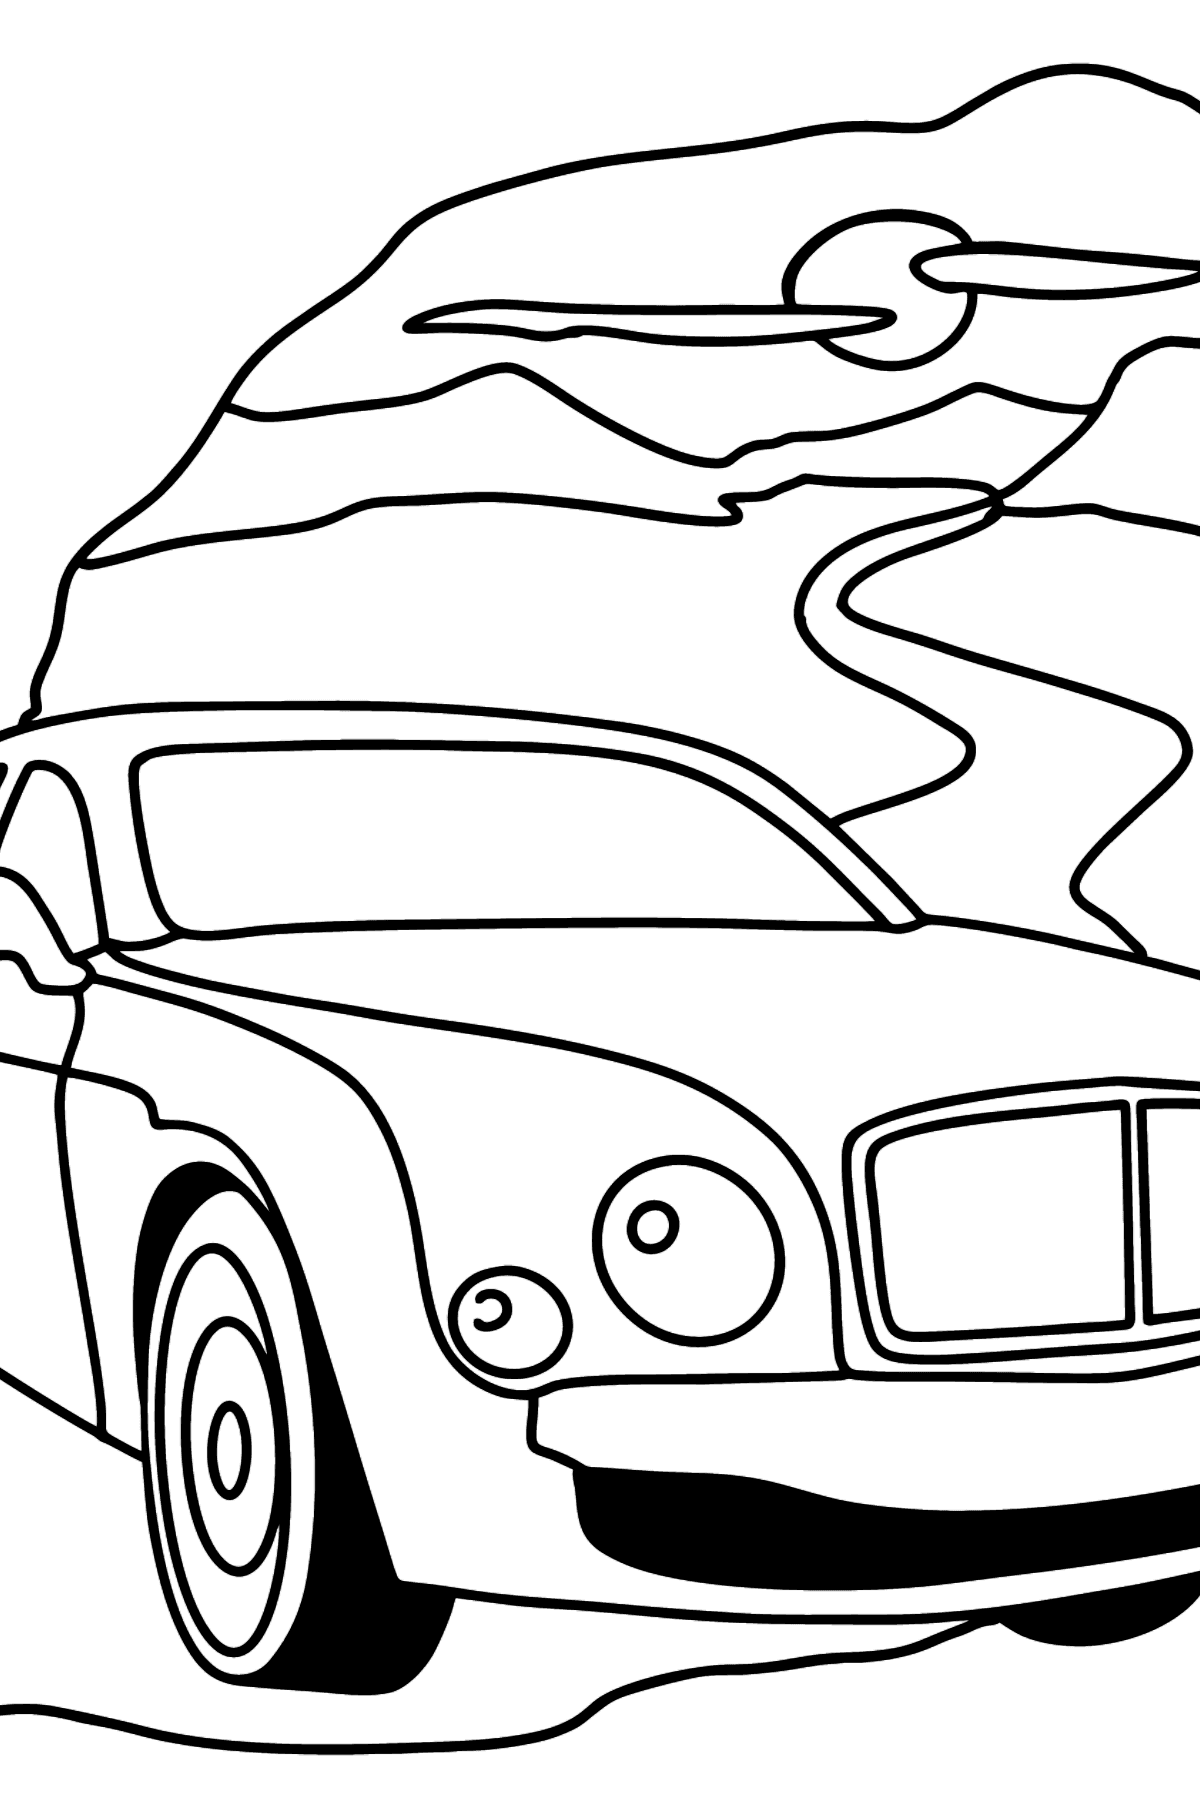 Bentley Mulsanne Car coloring page - Coloring Pages for Kids